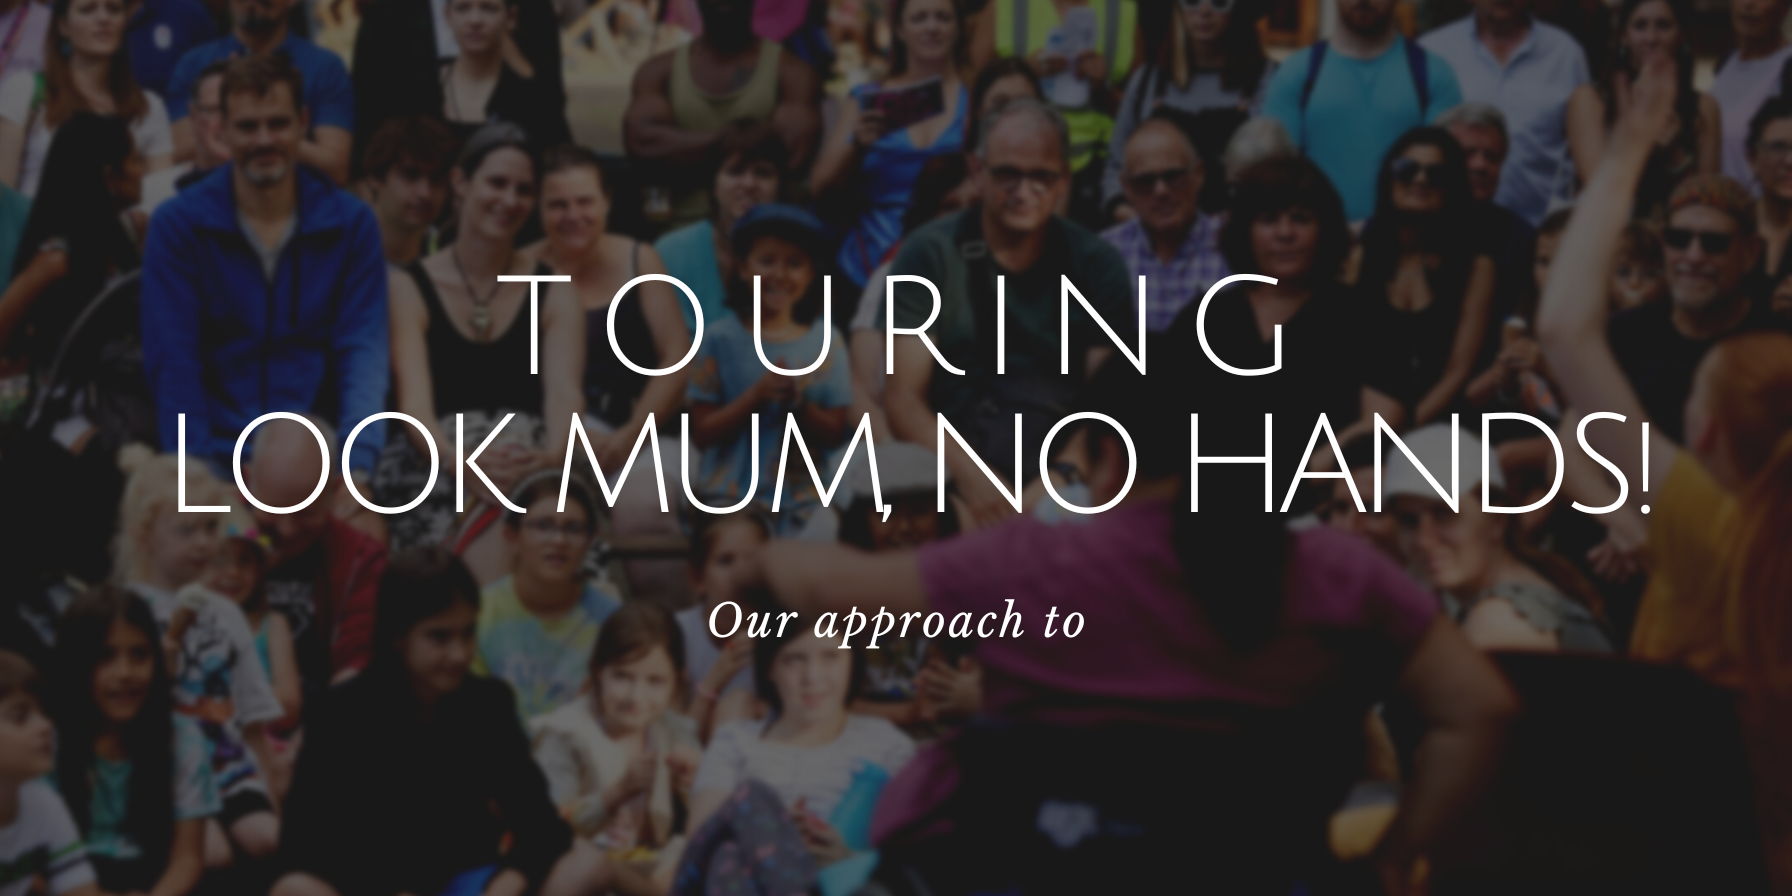 text over an image of a large outdoor audience. text reads: "Touring Look Mum, No Hands! Our approach to"